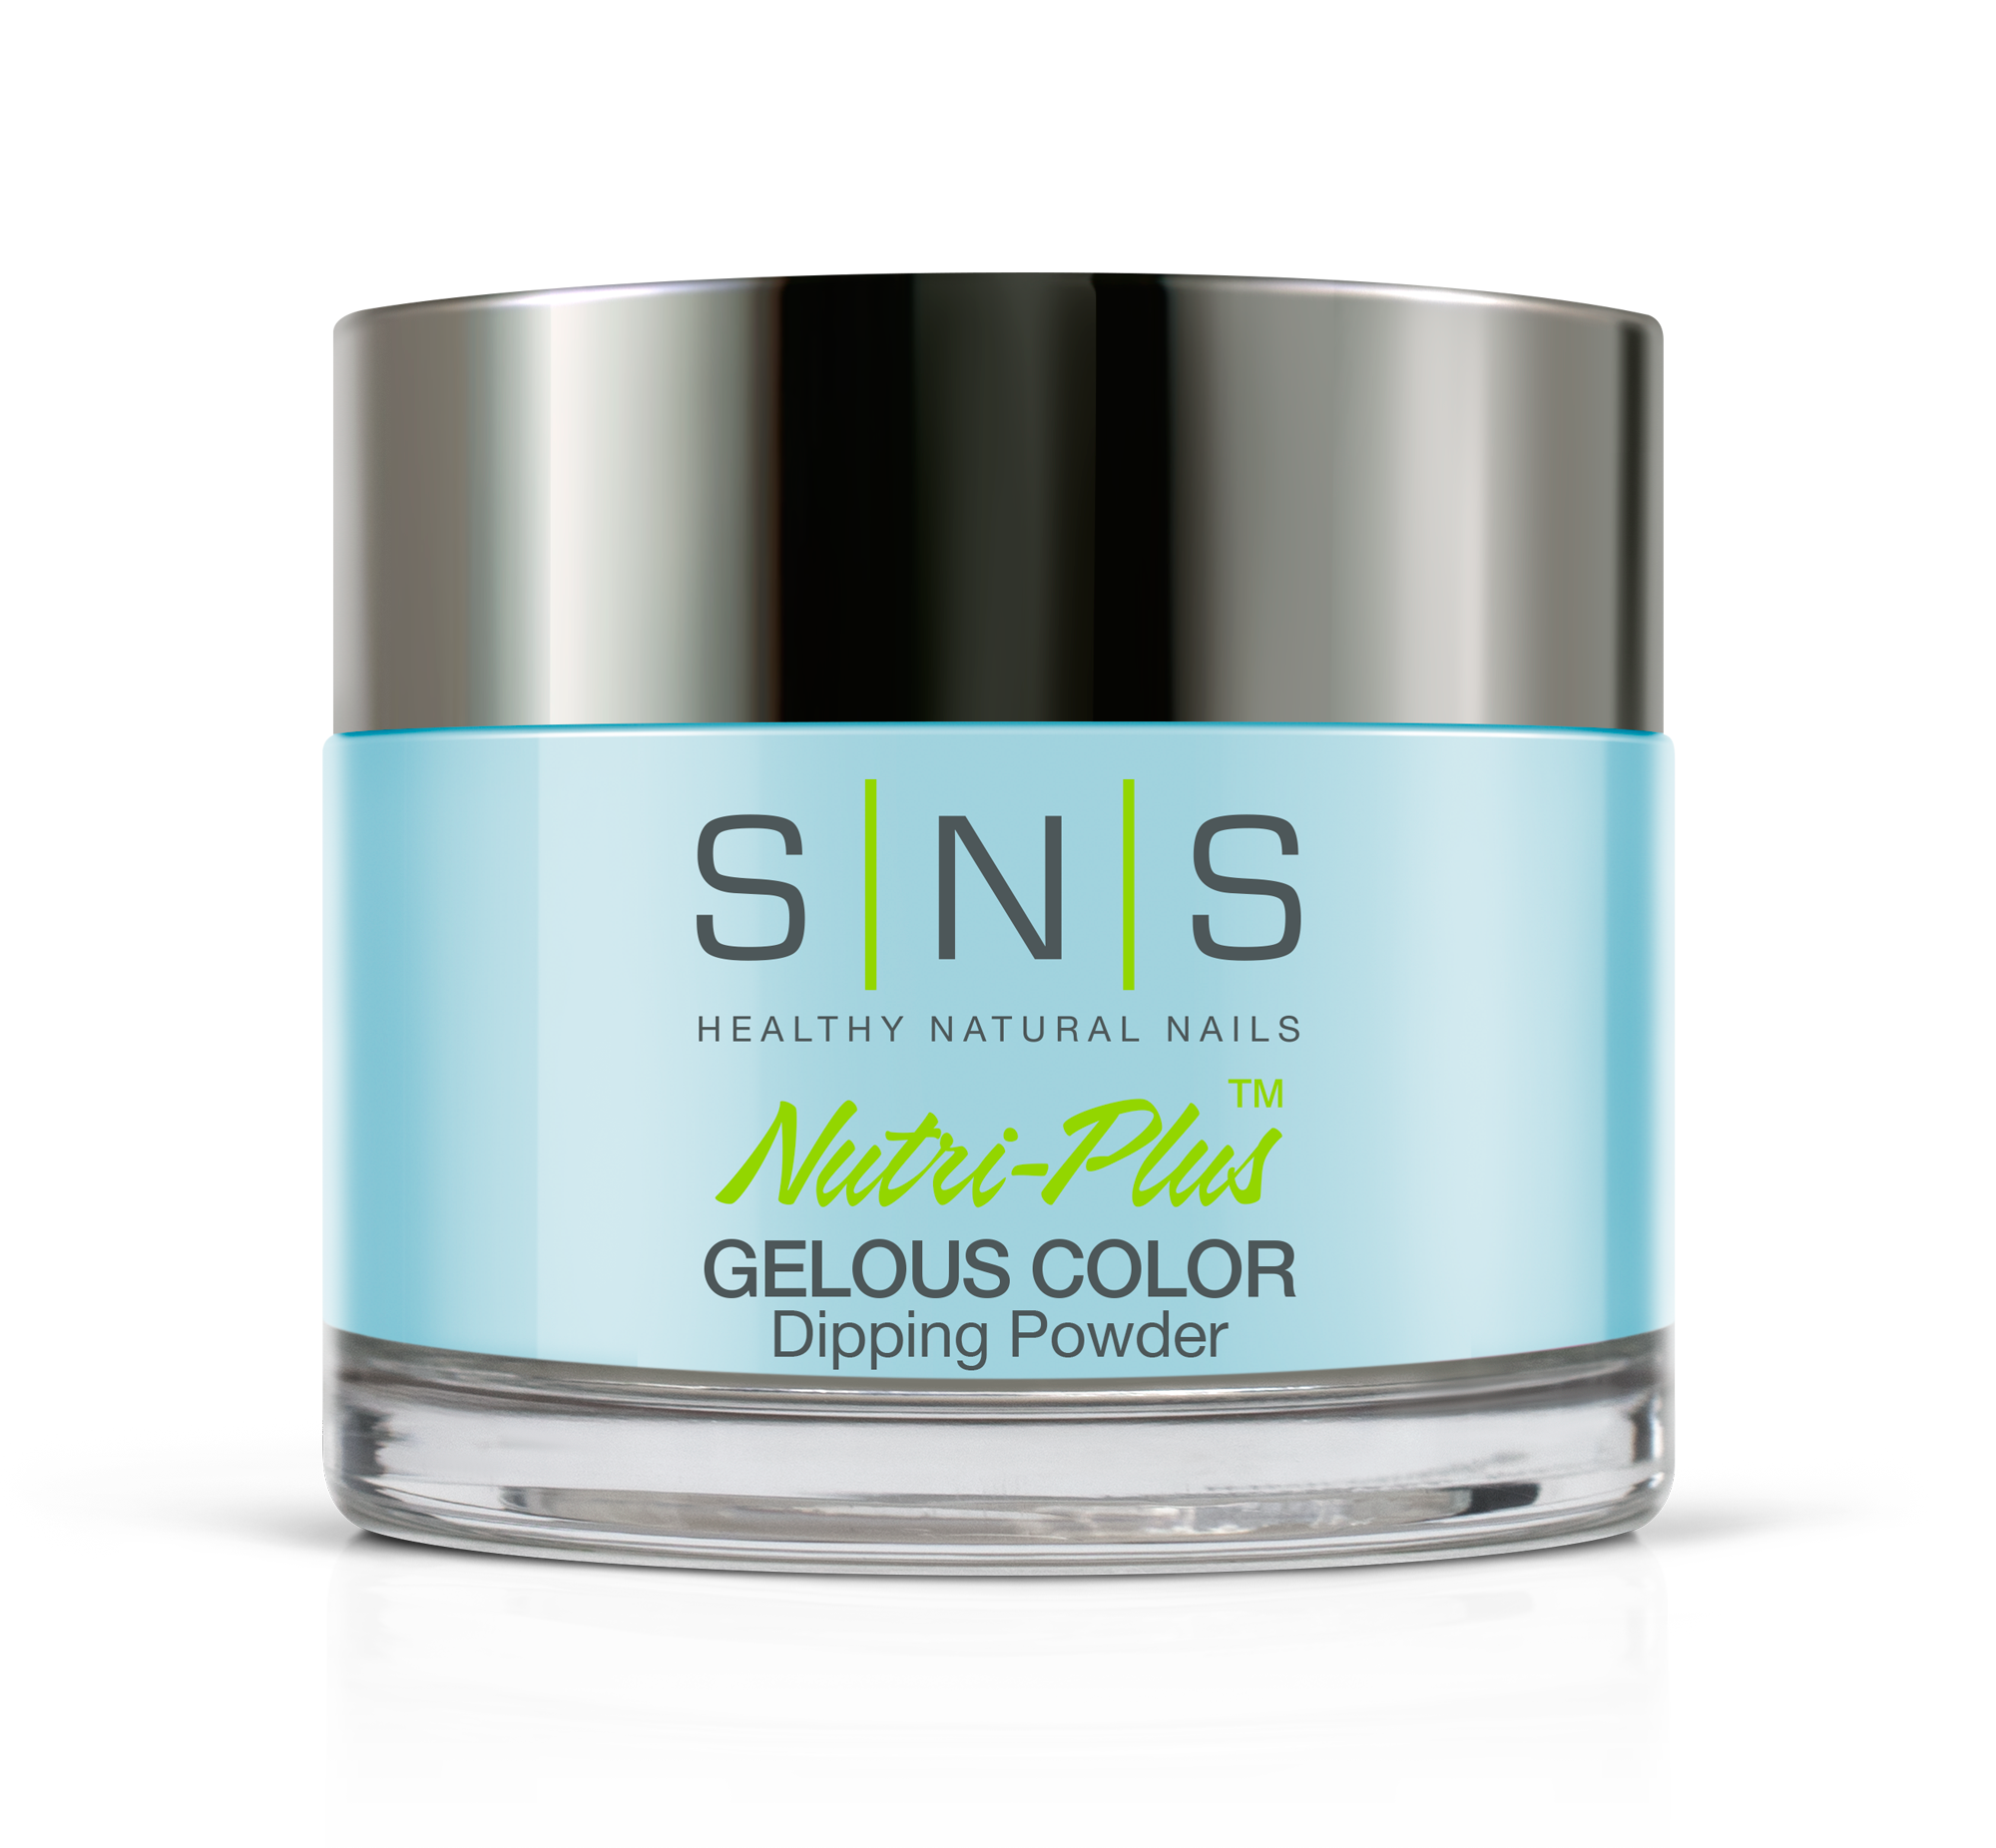 SNS Dipping Powder Nail - BD10 - Cashmere Cardigan - Blue Colors